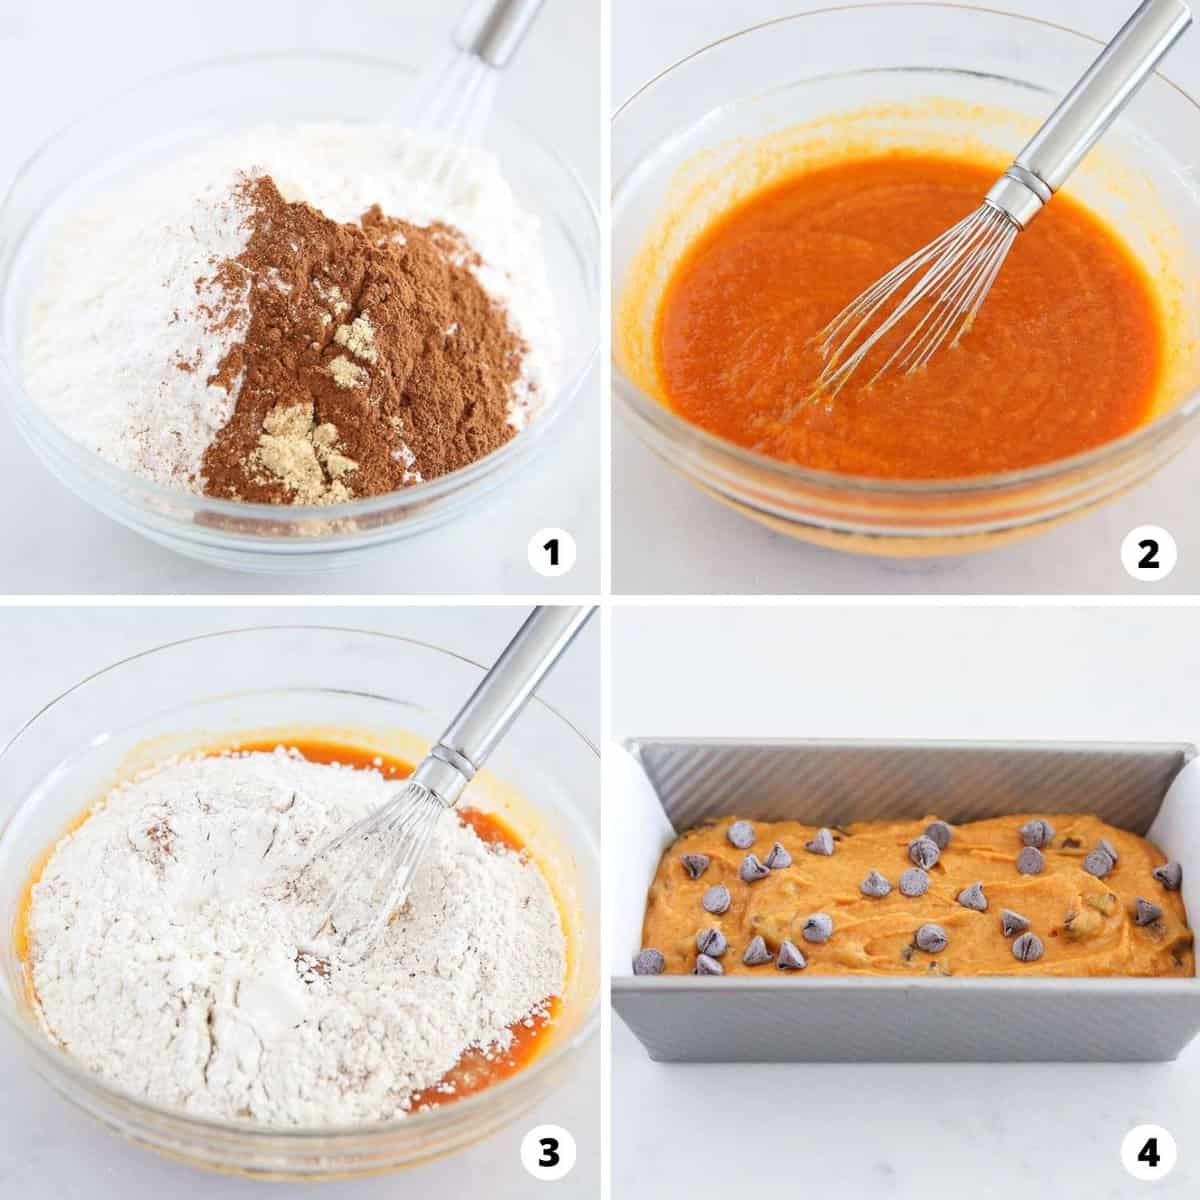 Showing how to make chocolate chip pumpkin bread in a 4 step collage.